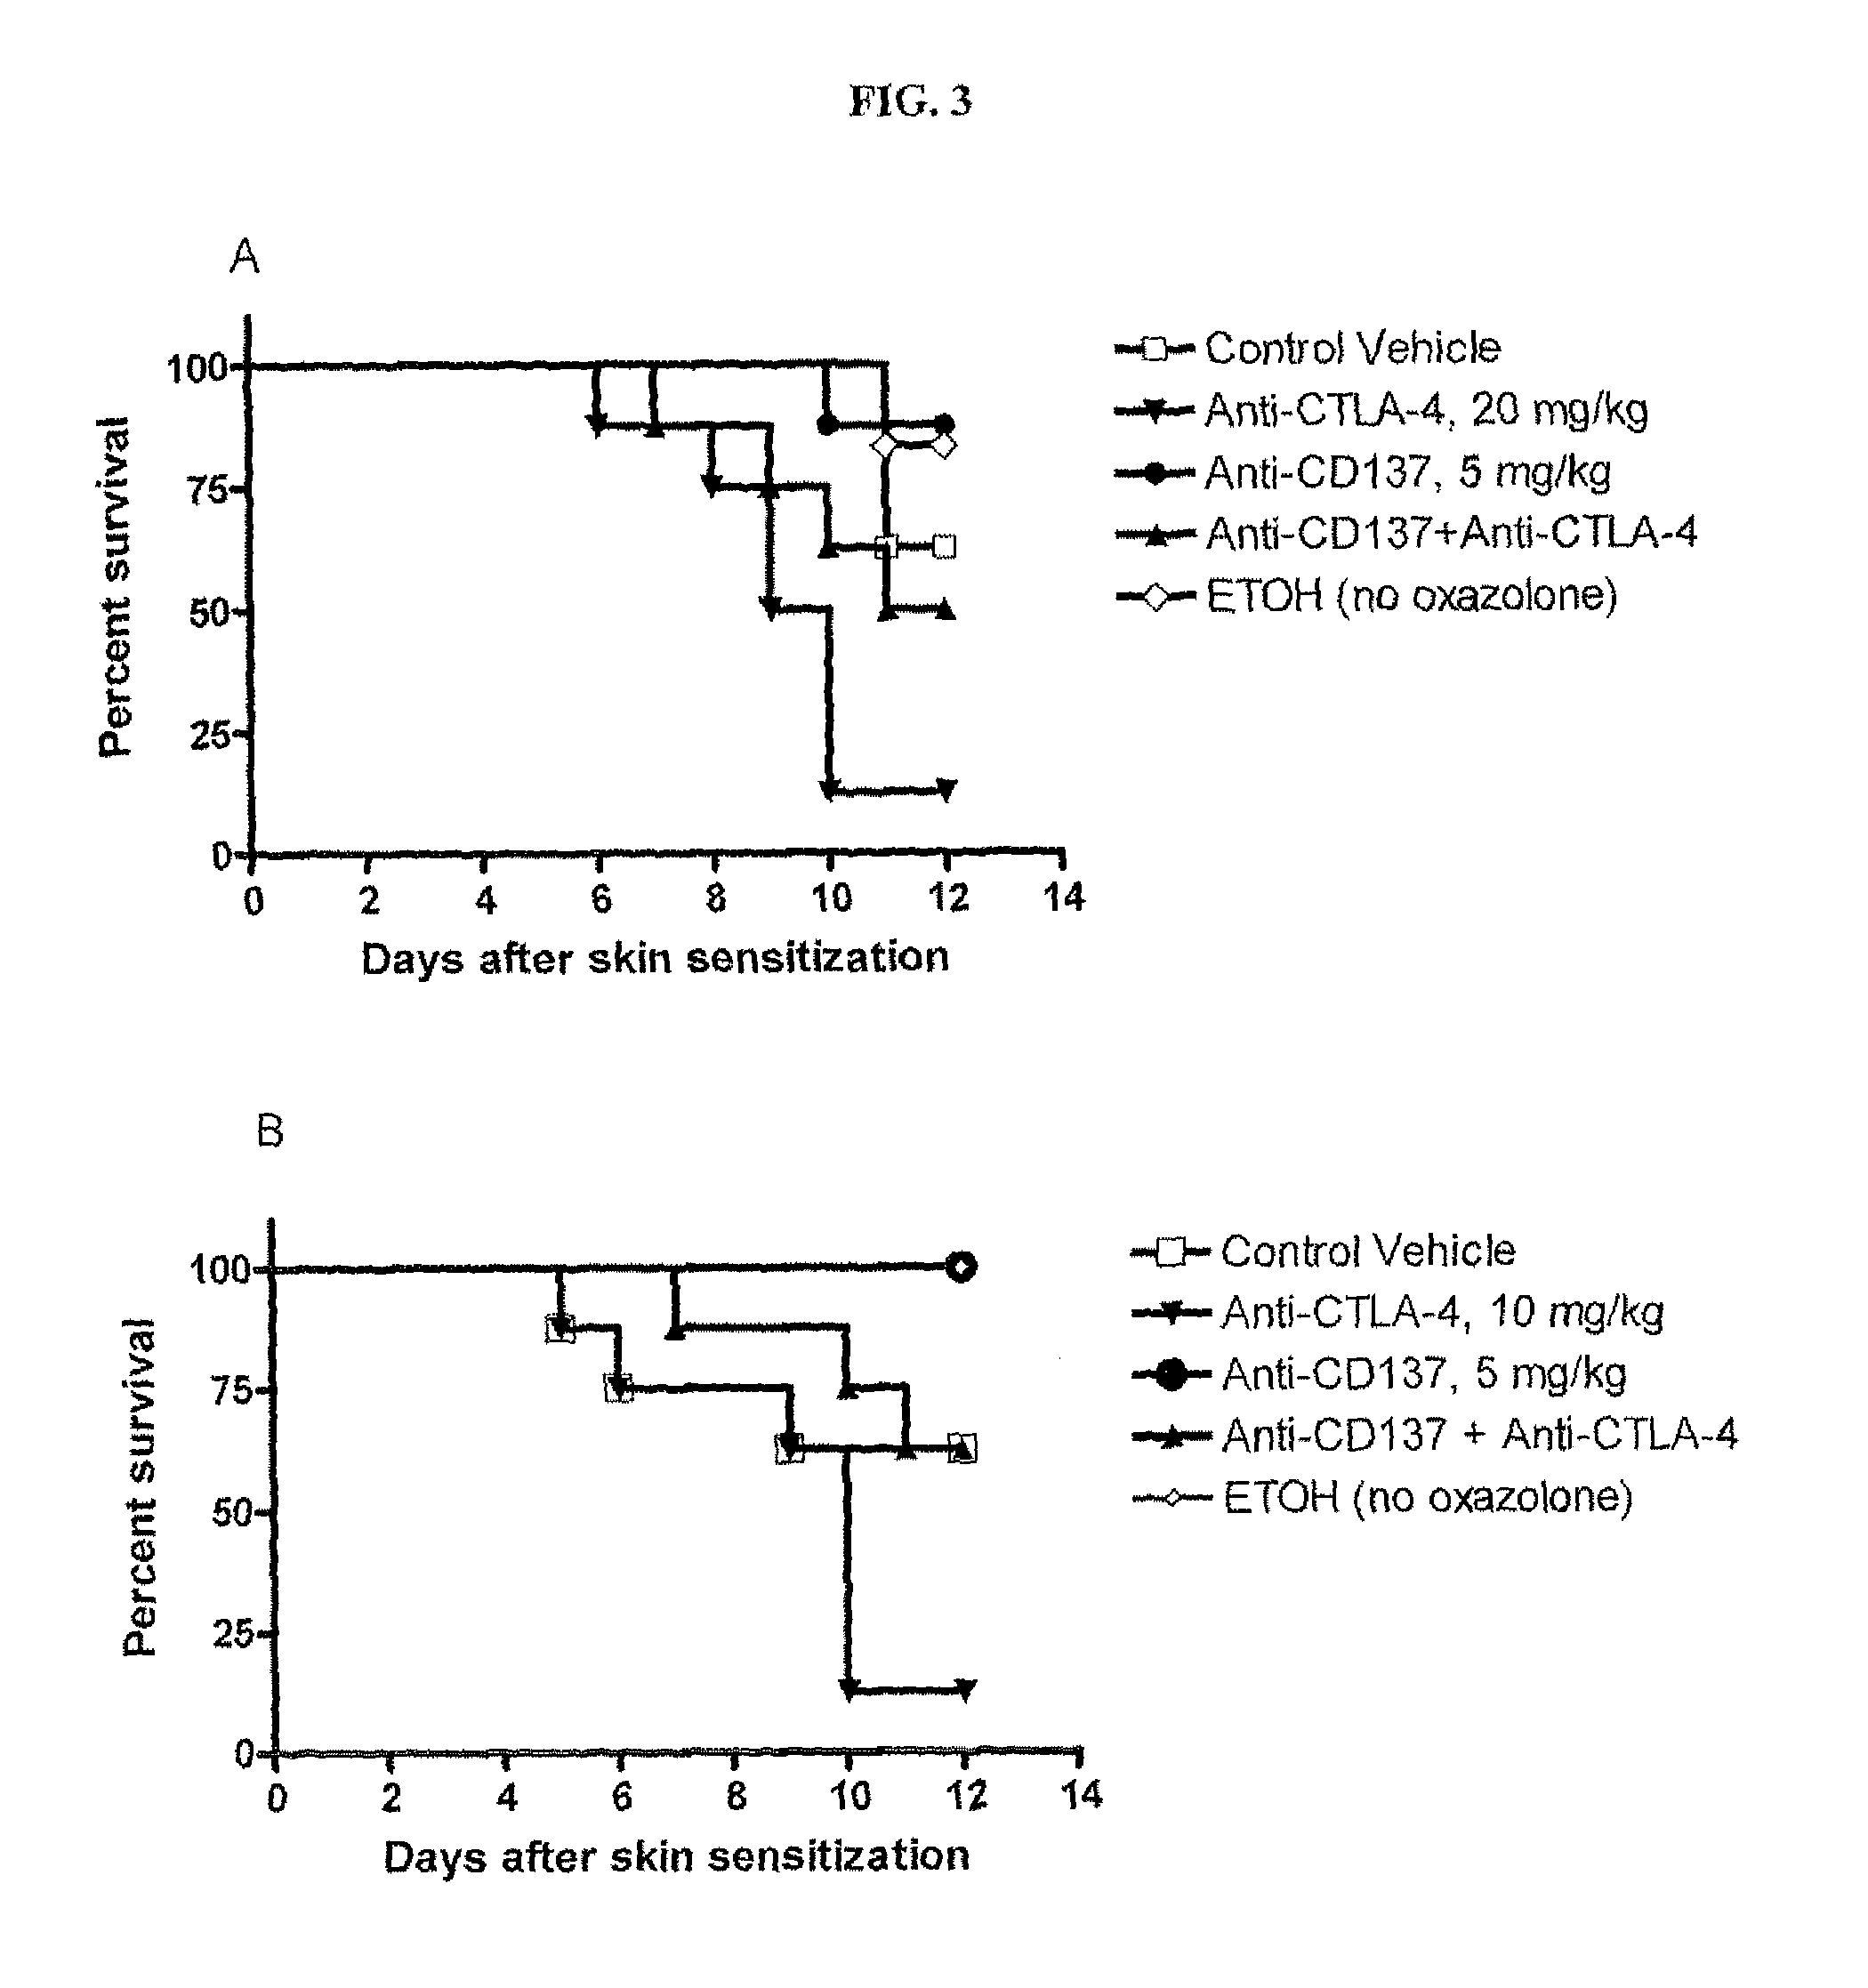 Combination of CD137 antibody and CTLA-4 antibody for the treatment of proliferative diseases